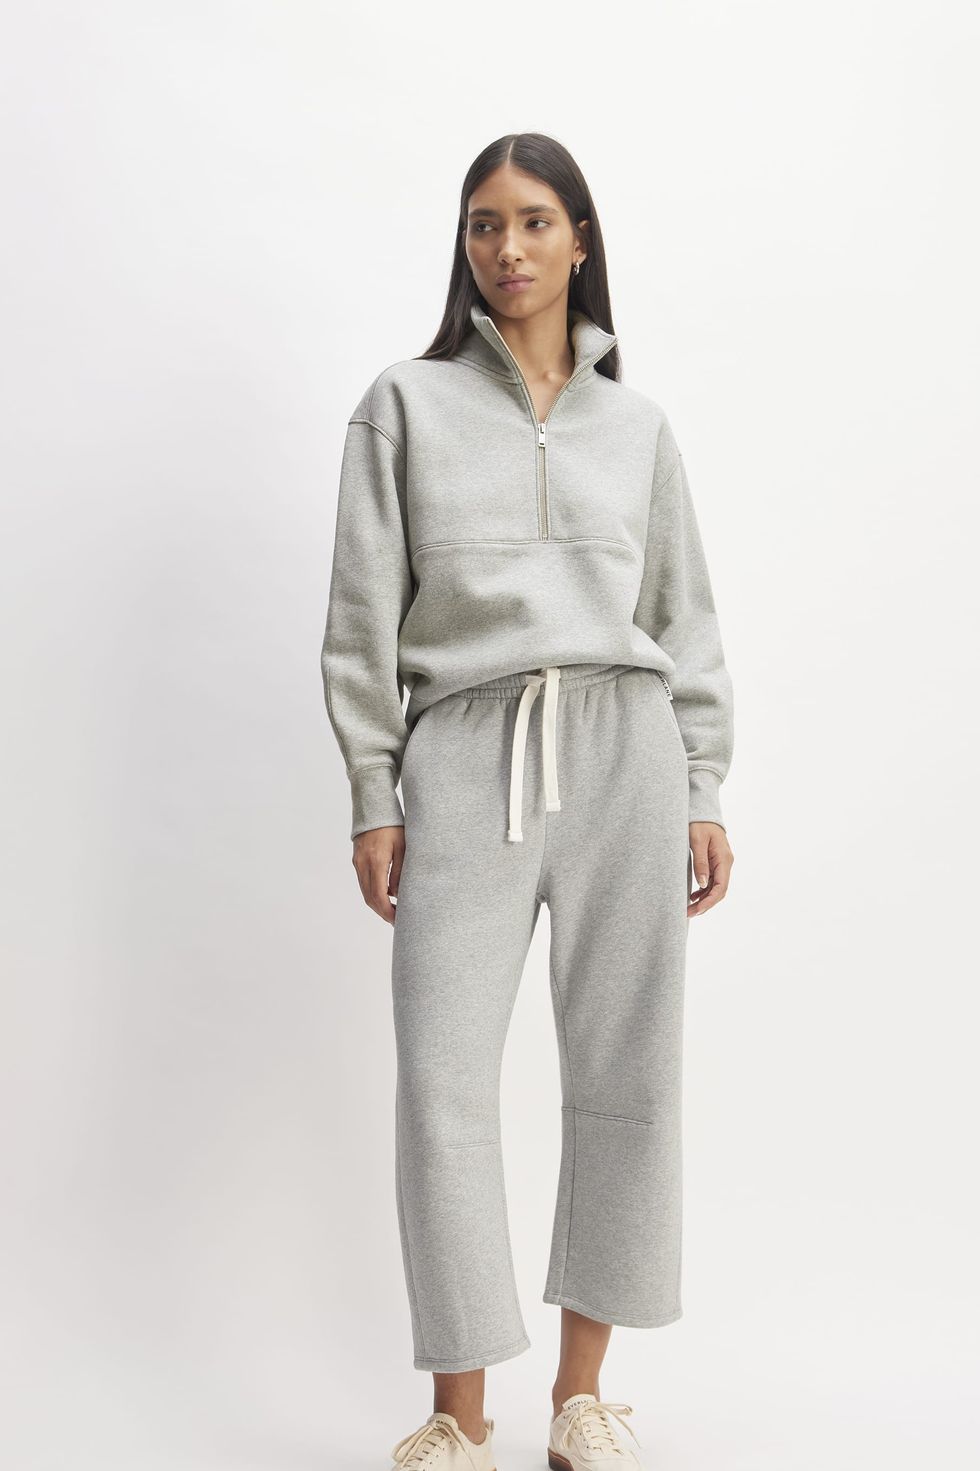 The 10 Best Matching Sweatsuit Sets to Shop Now